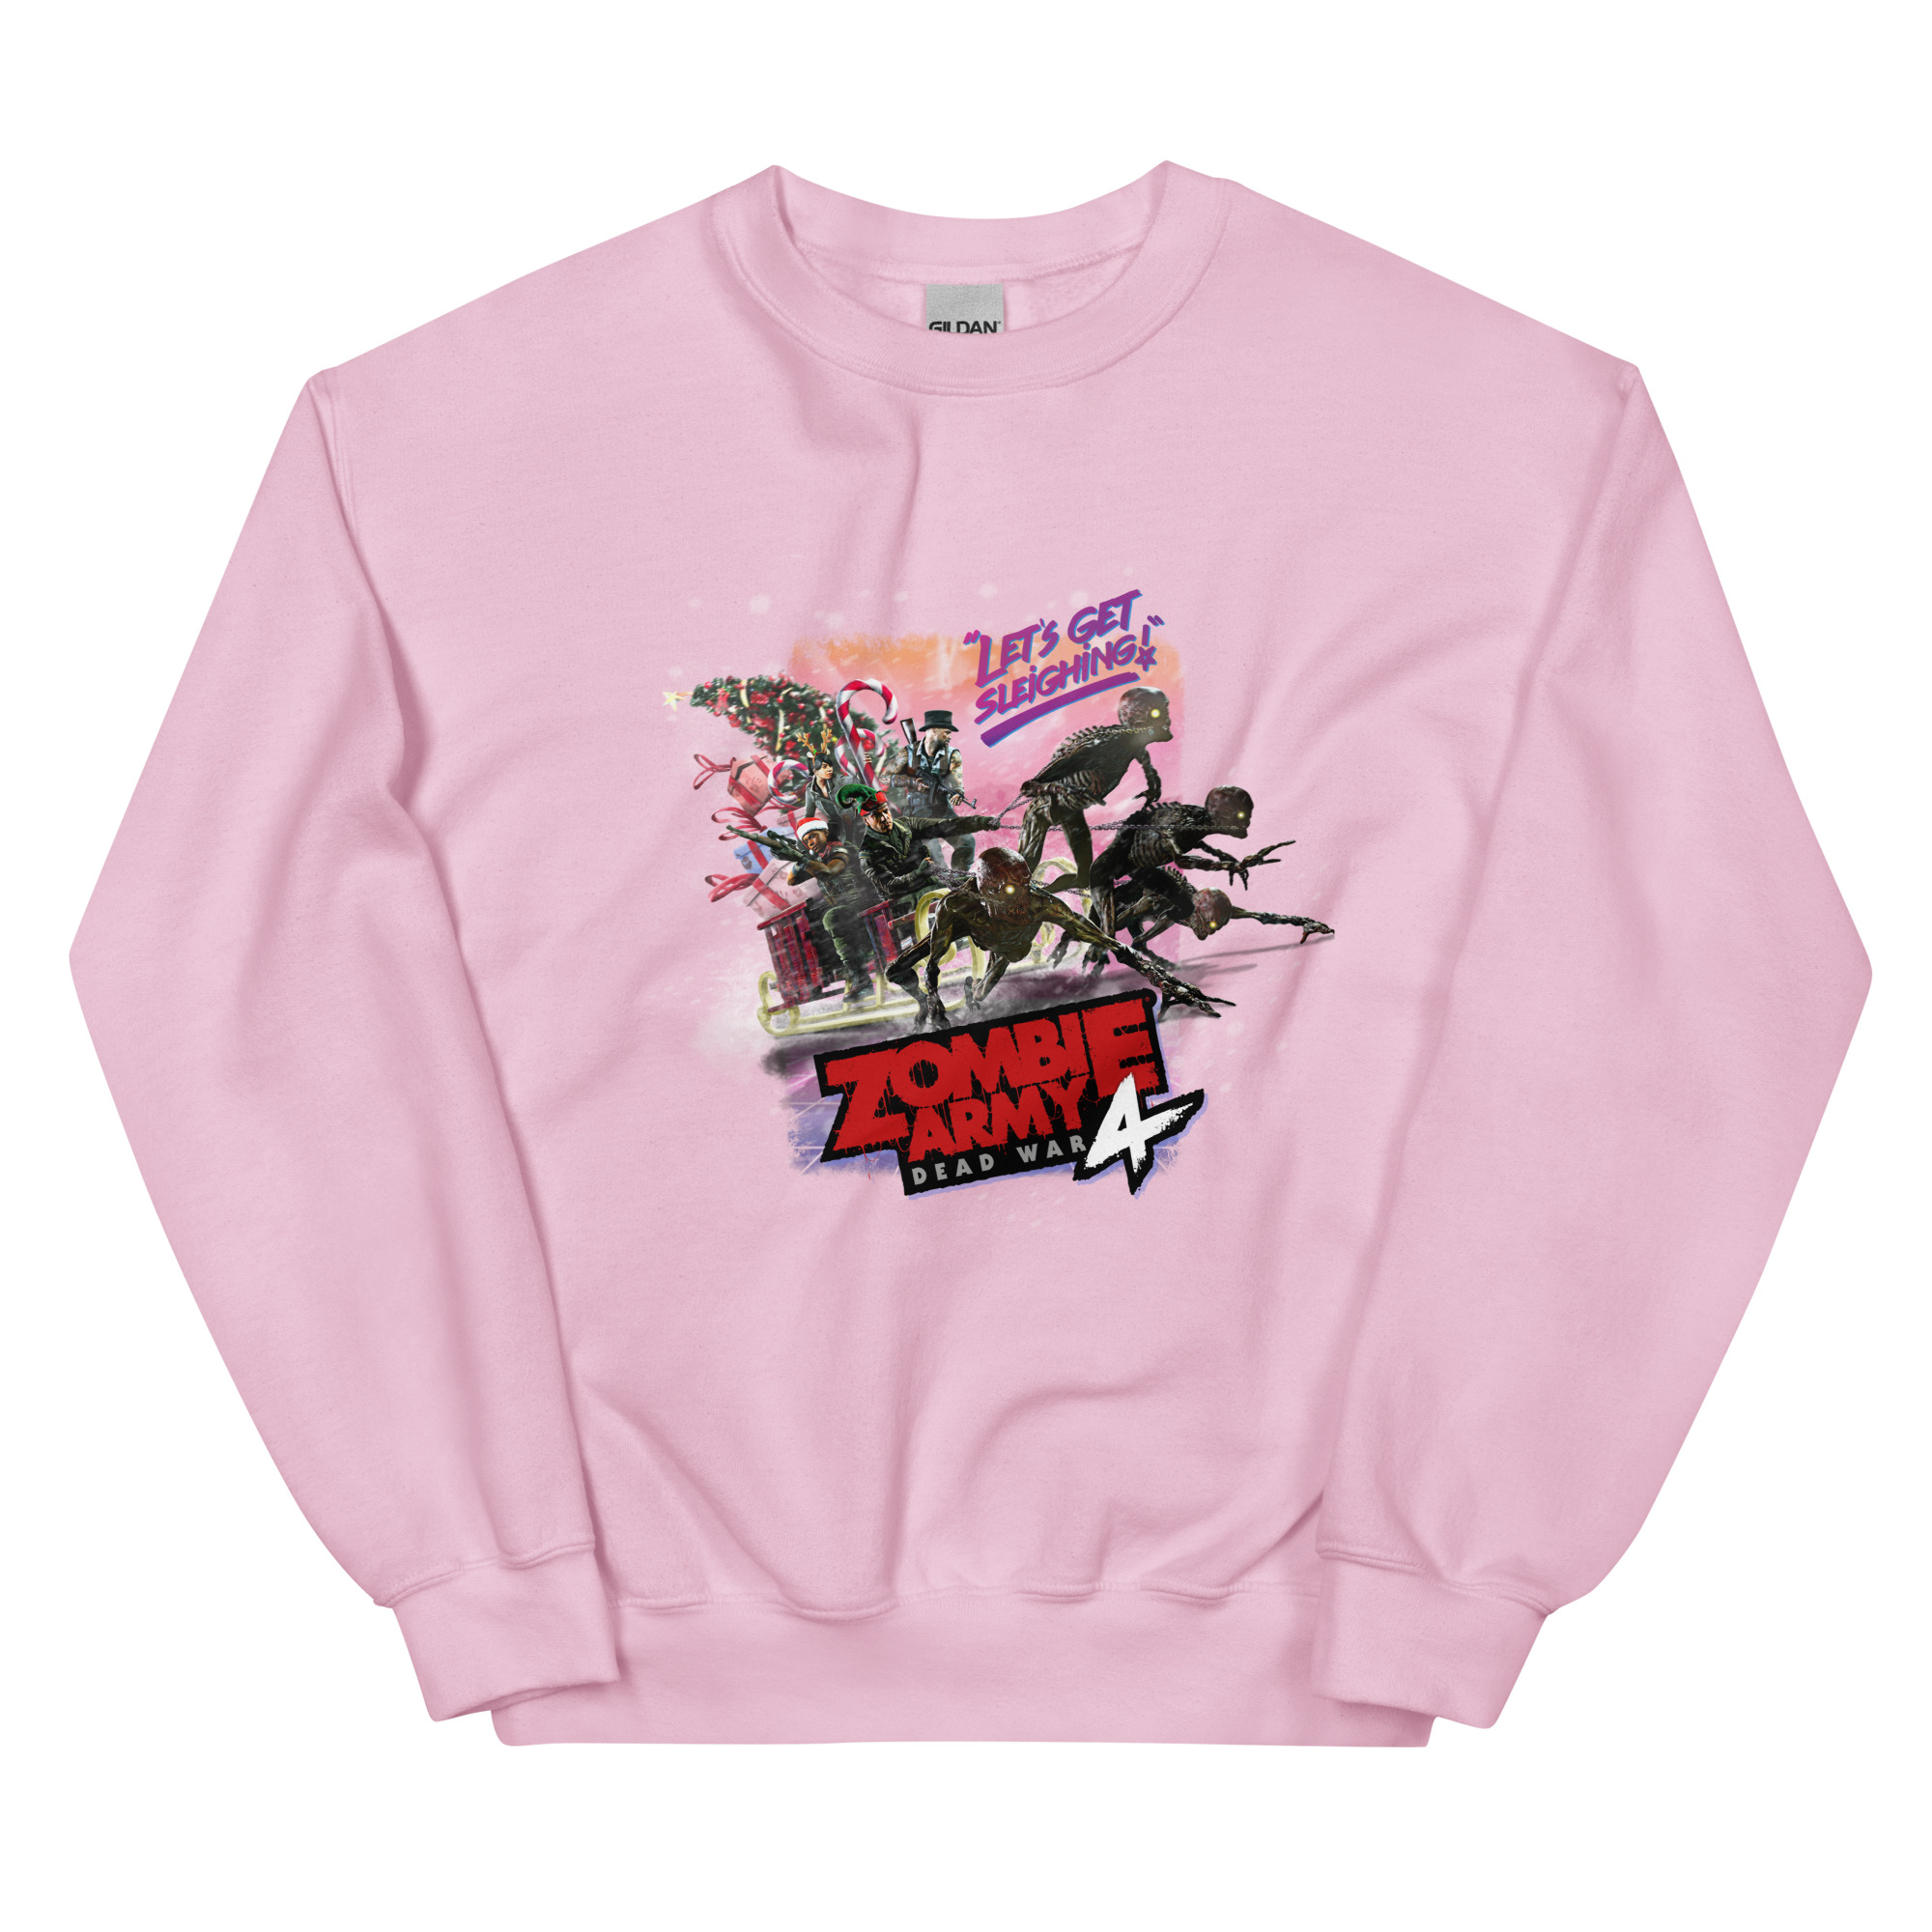 An image of a light pink jumper with an image of the main characters in a festive sleigh being pulled by zombies from Zombie Army 4